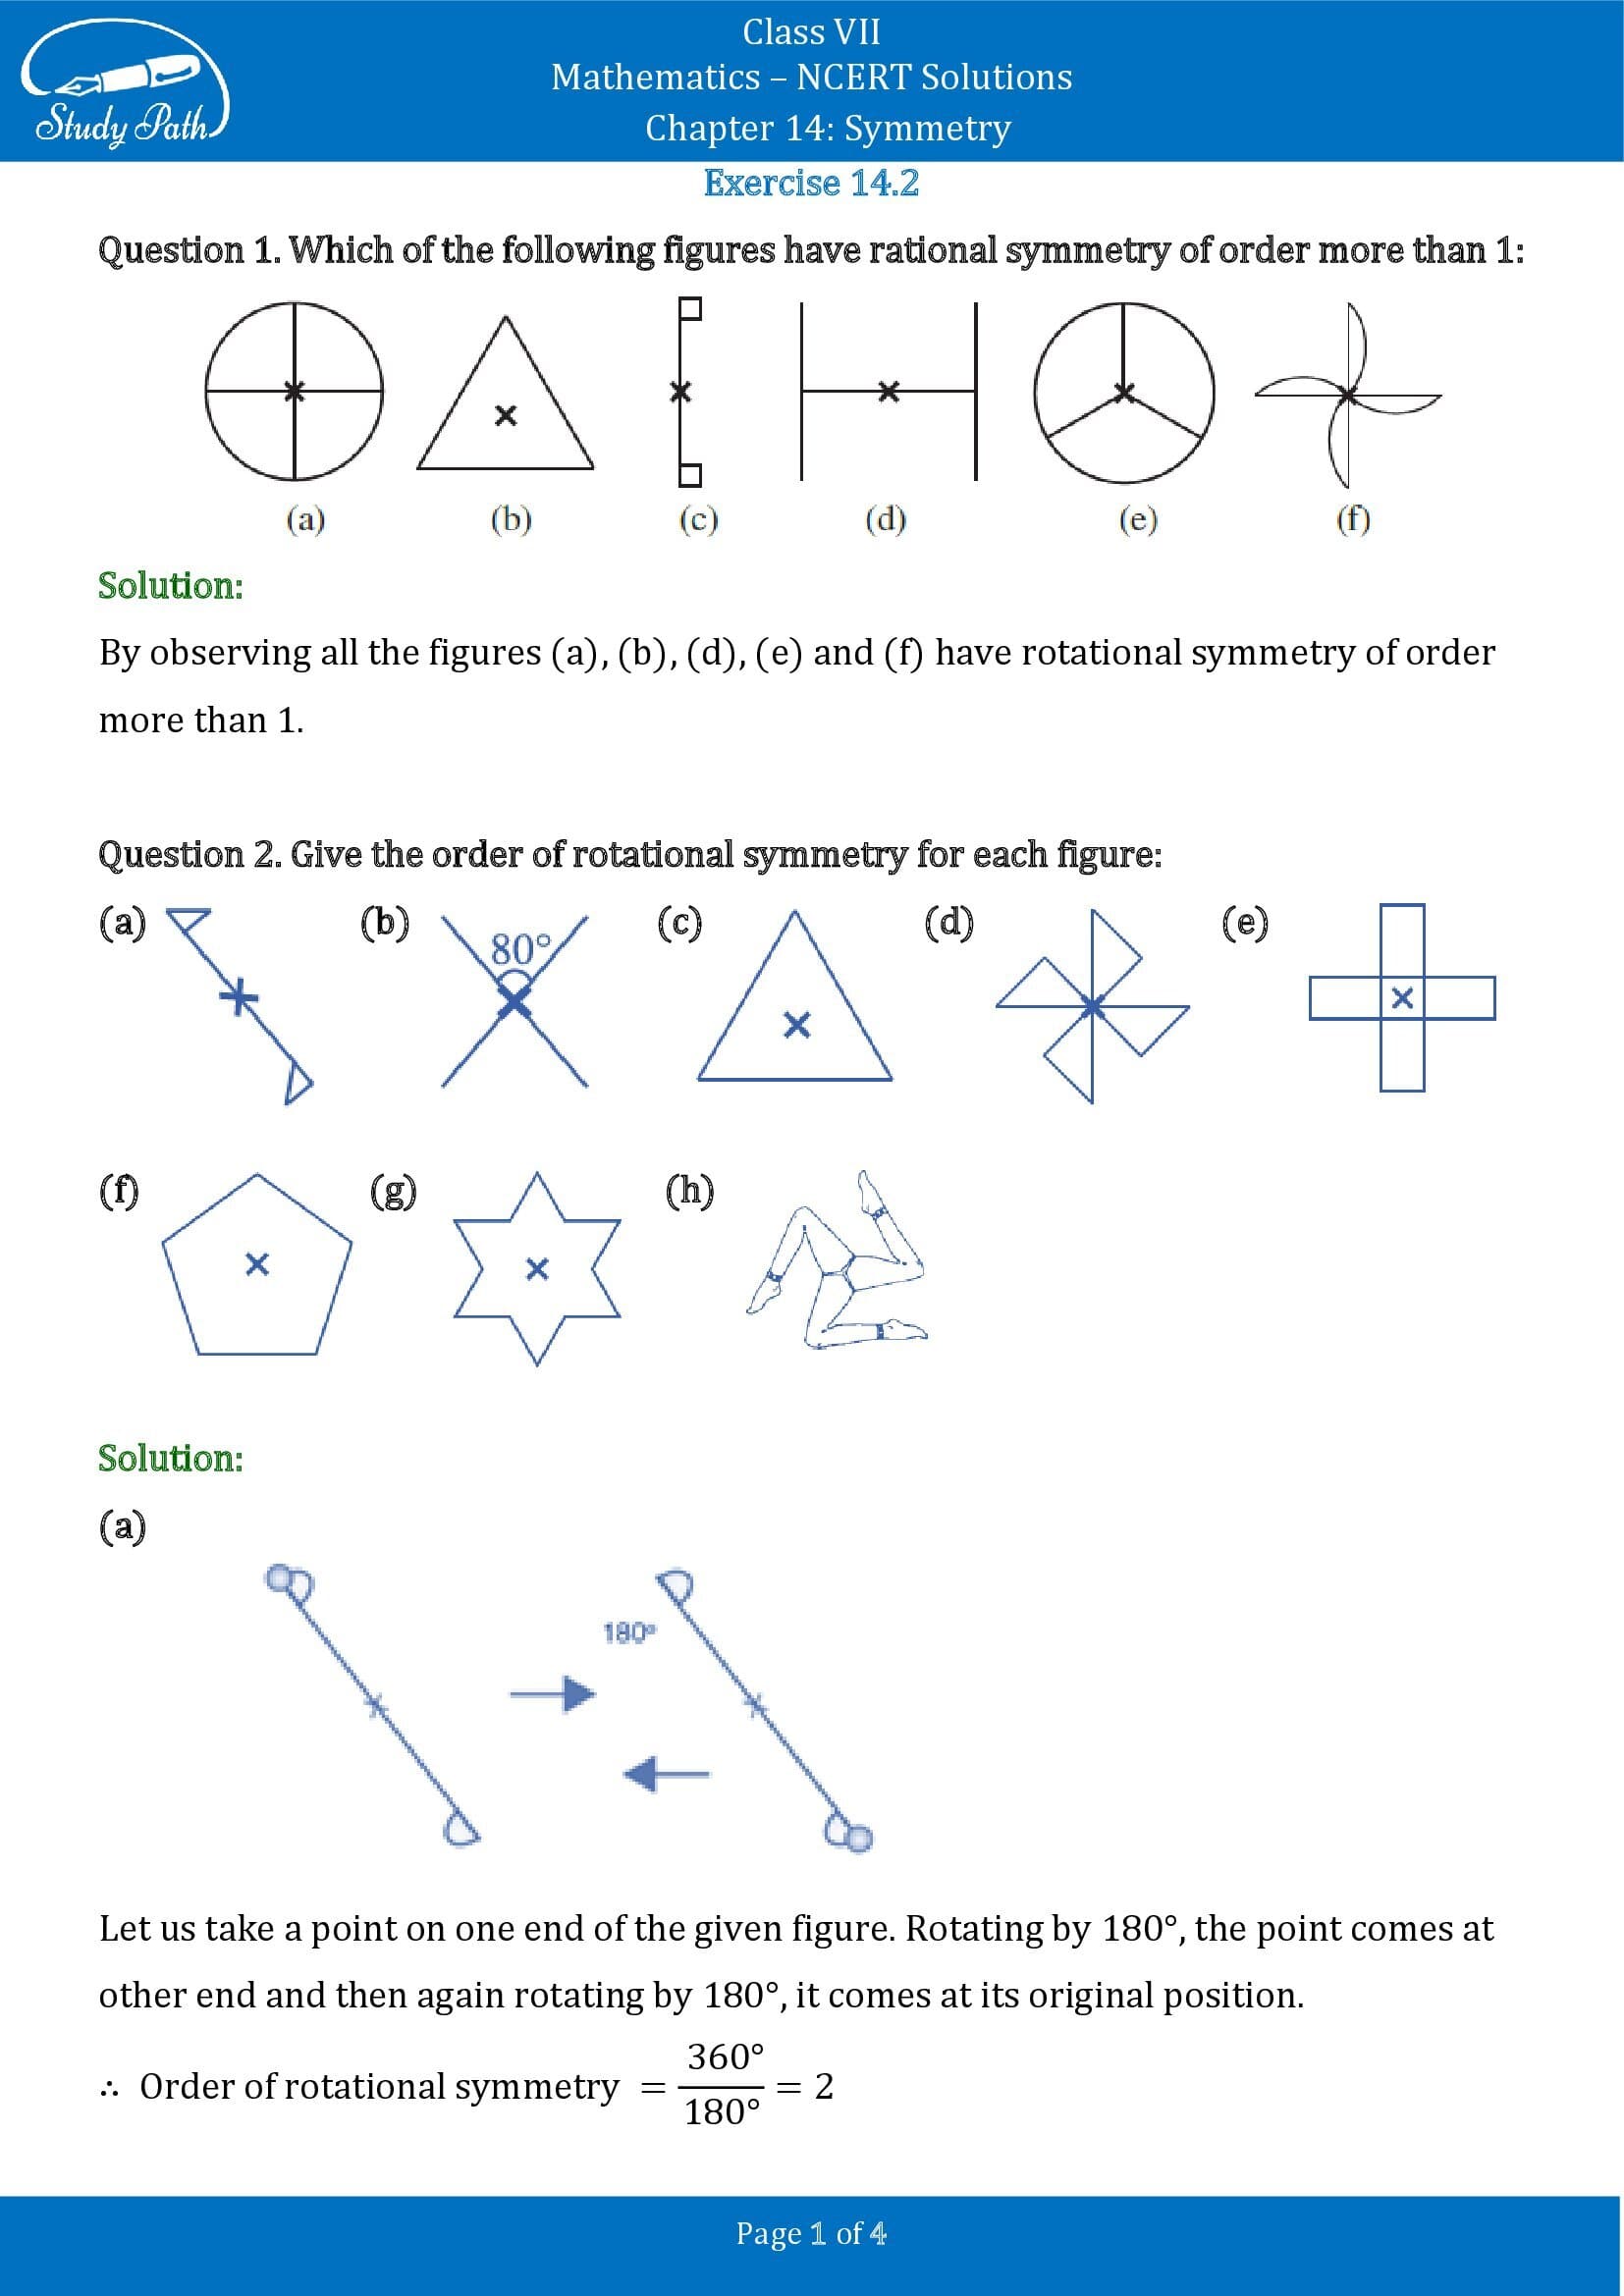 NCERT Solutions for Class 7 Maths Chapter 14 Symmetry Exercise 14.2 00001